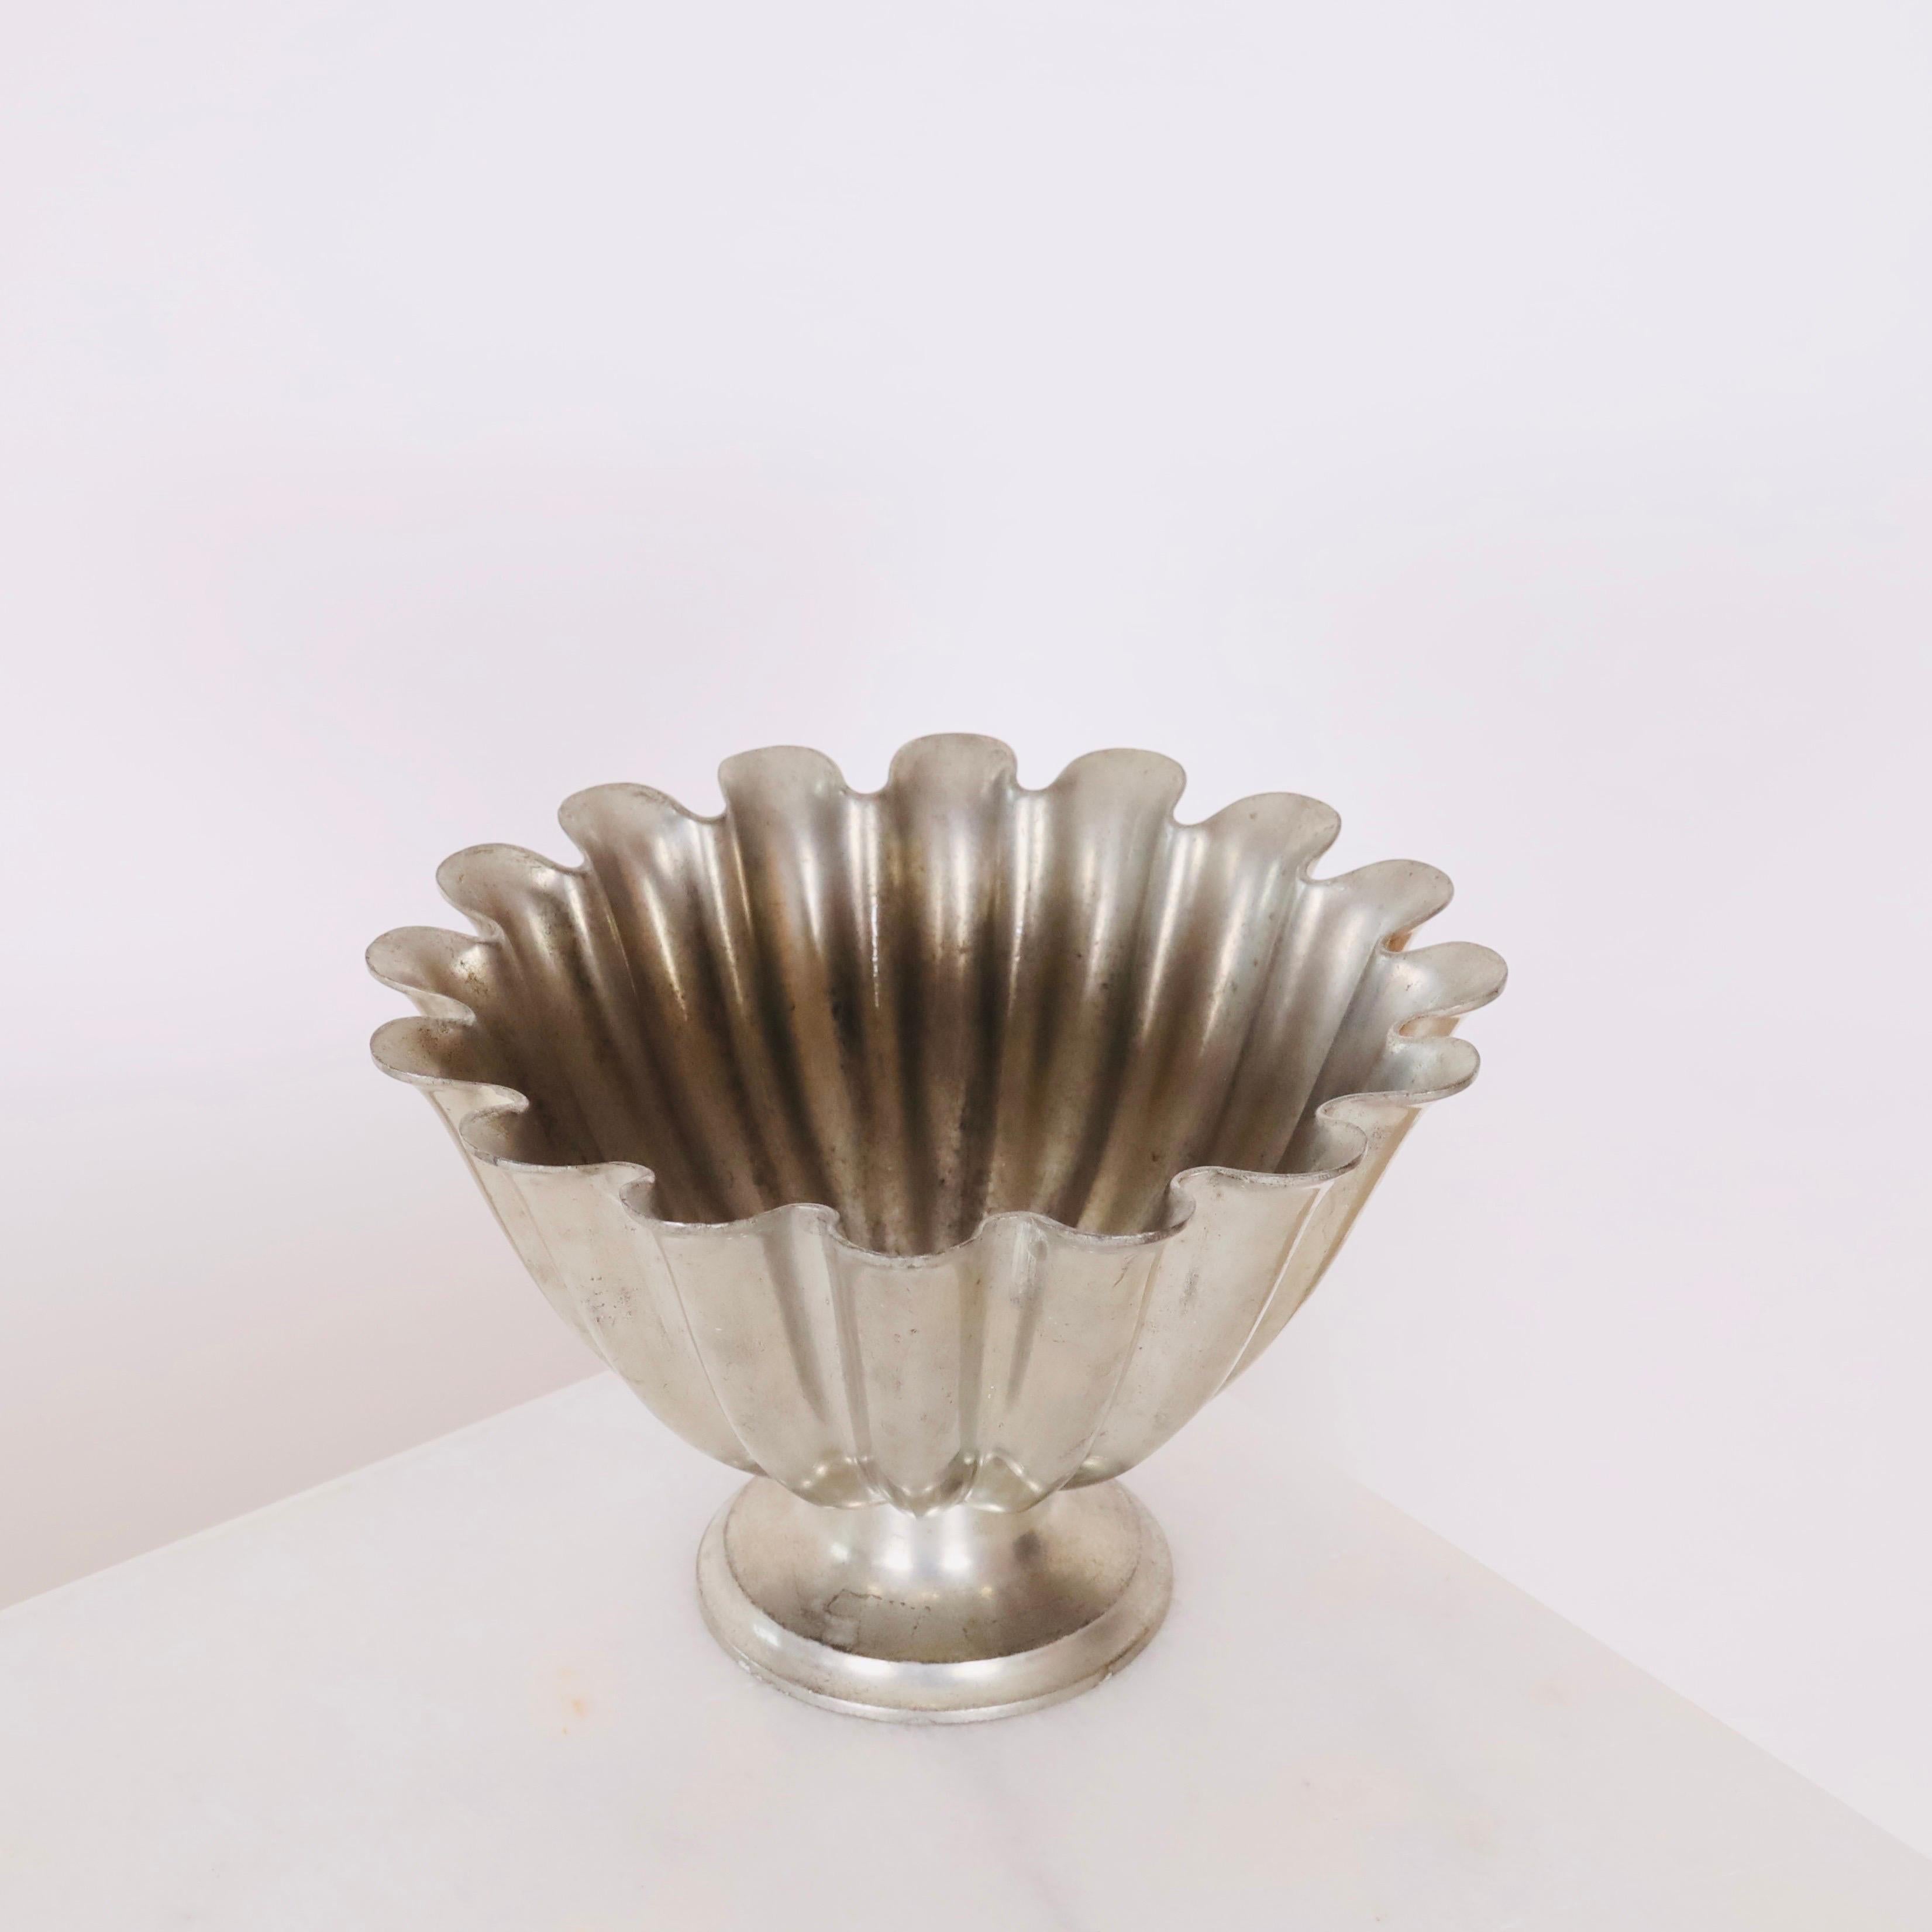 Early 20th Century Scalloped pedestal pewter bowl by Just Andersen 1920s, Denmark